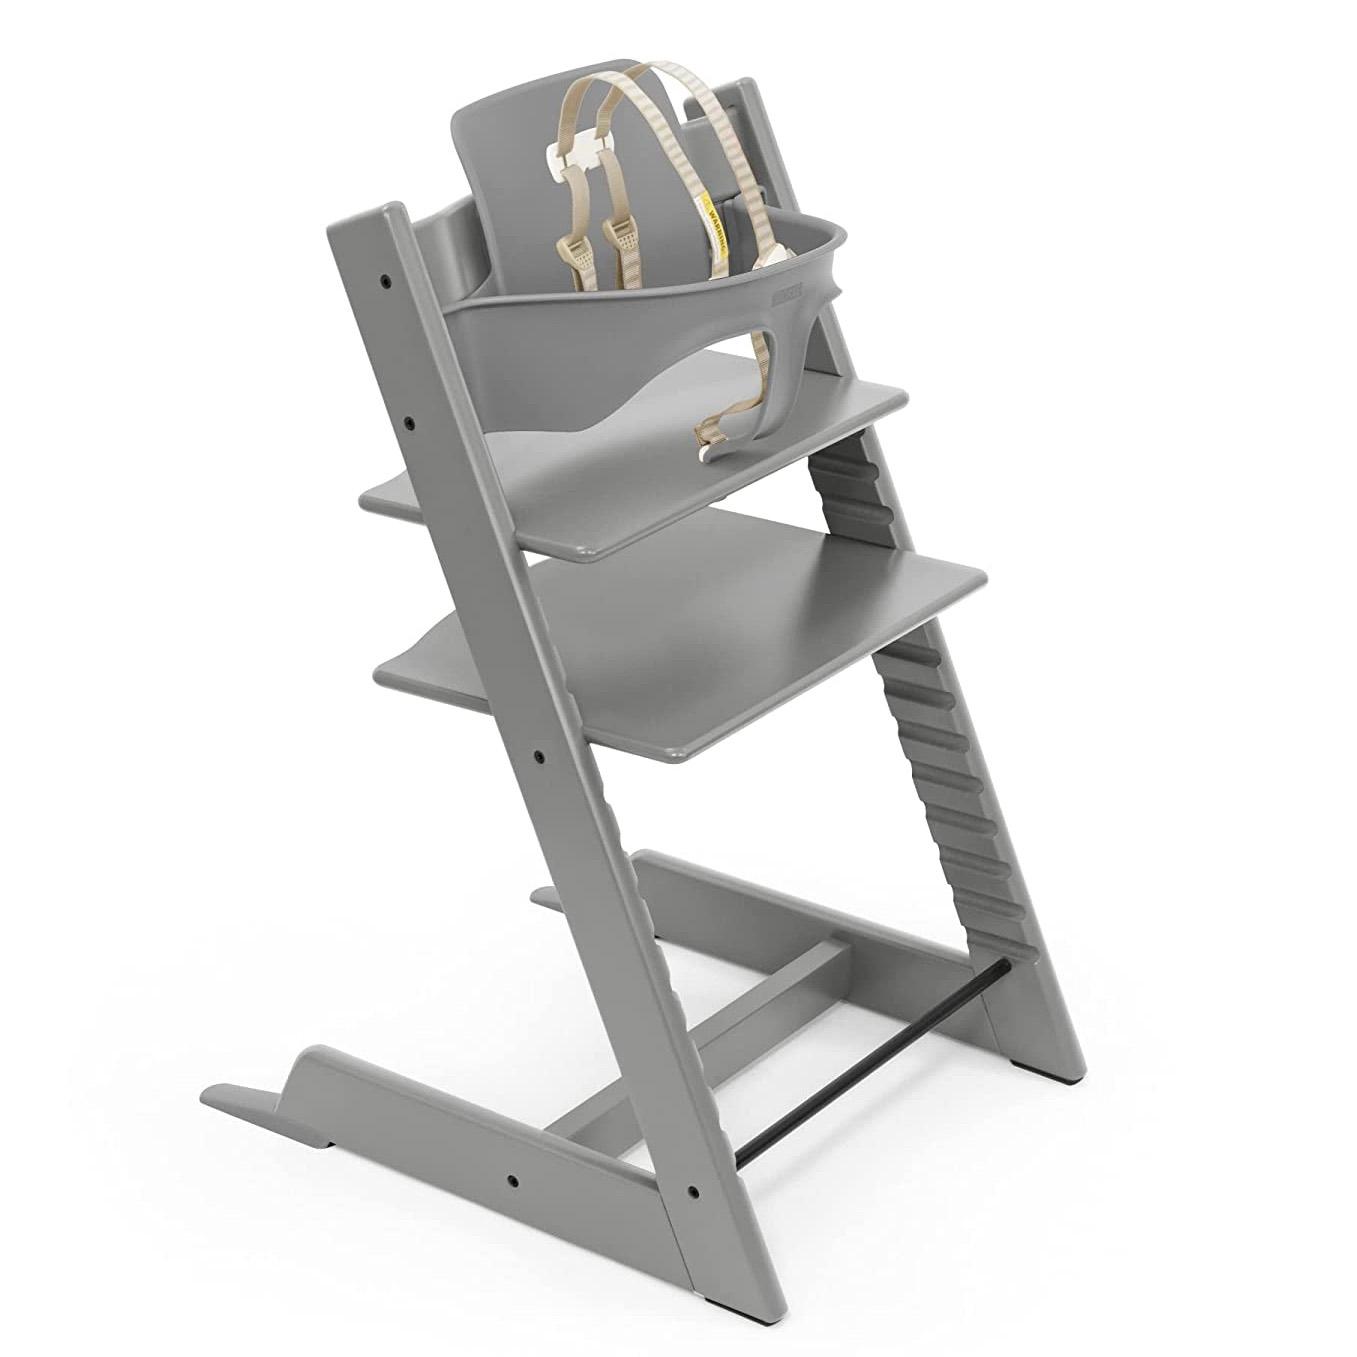 Stokke Tripp Trapp Adjustable Convertible High Chair for $239.20 Shipped